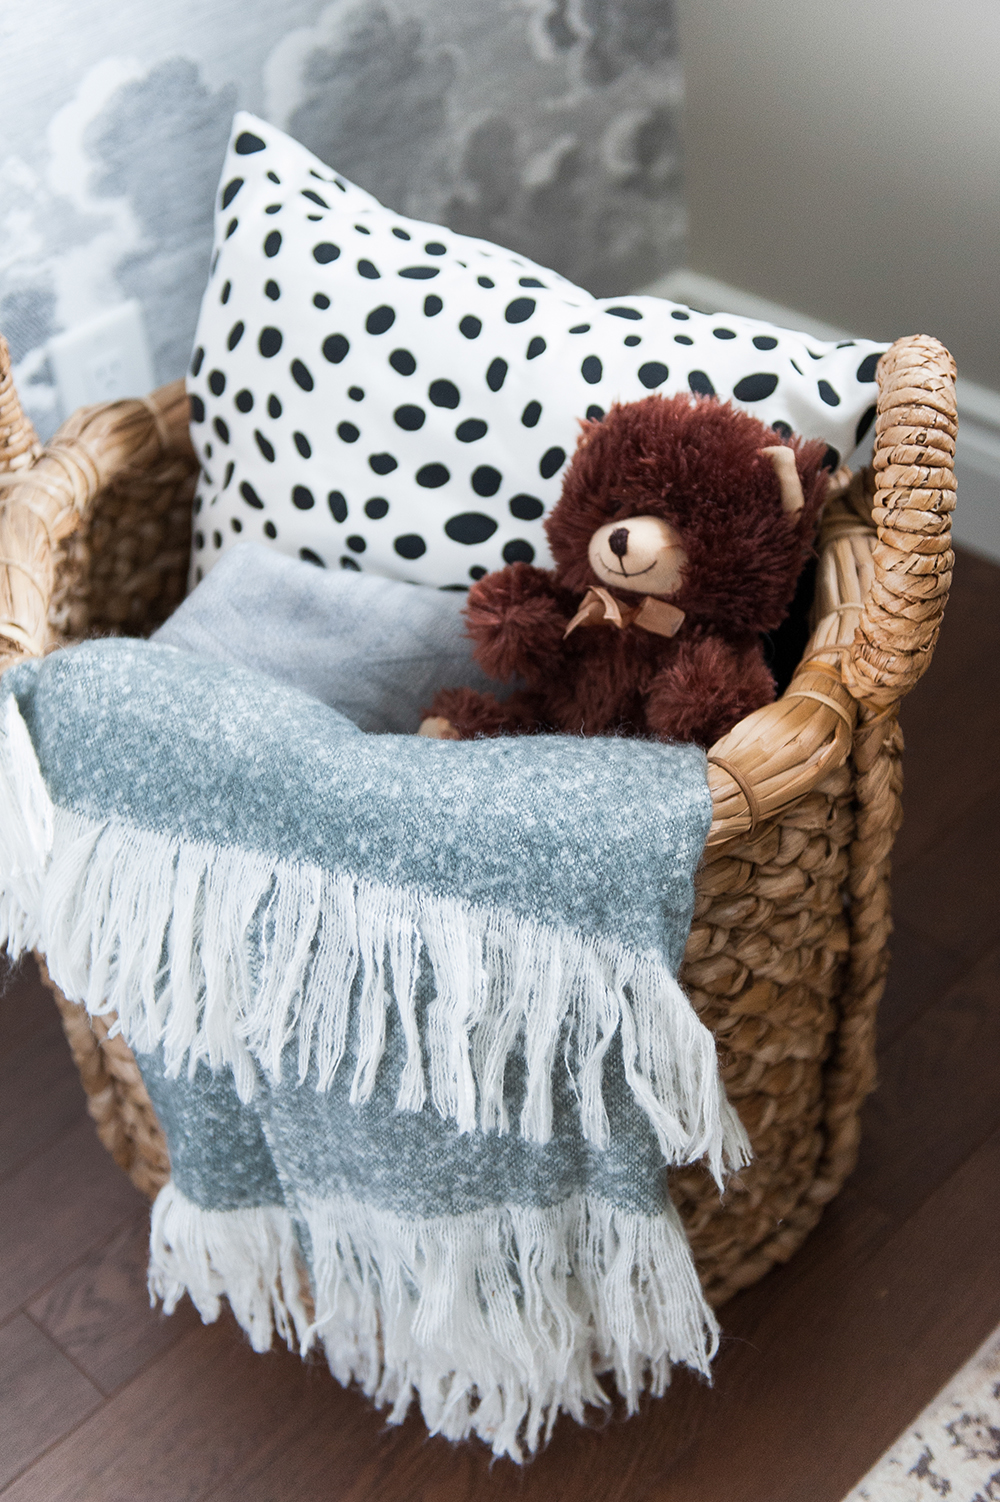 Large wicker baskets quickly combat clutter in a kids' room.